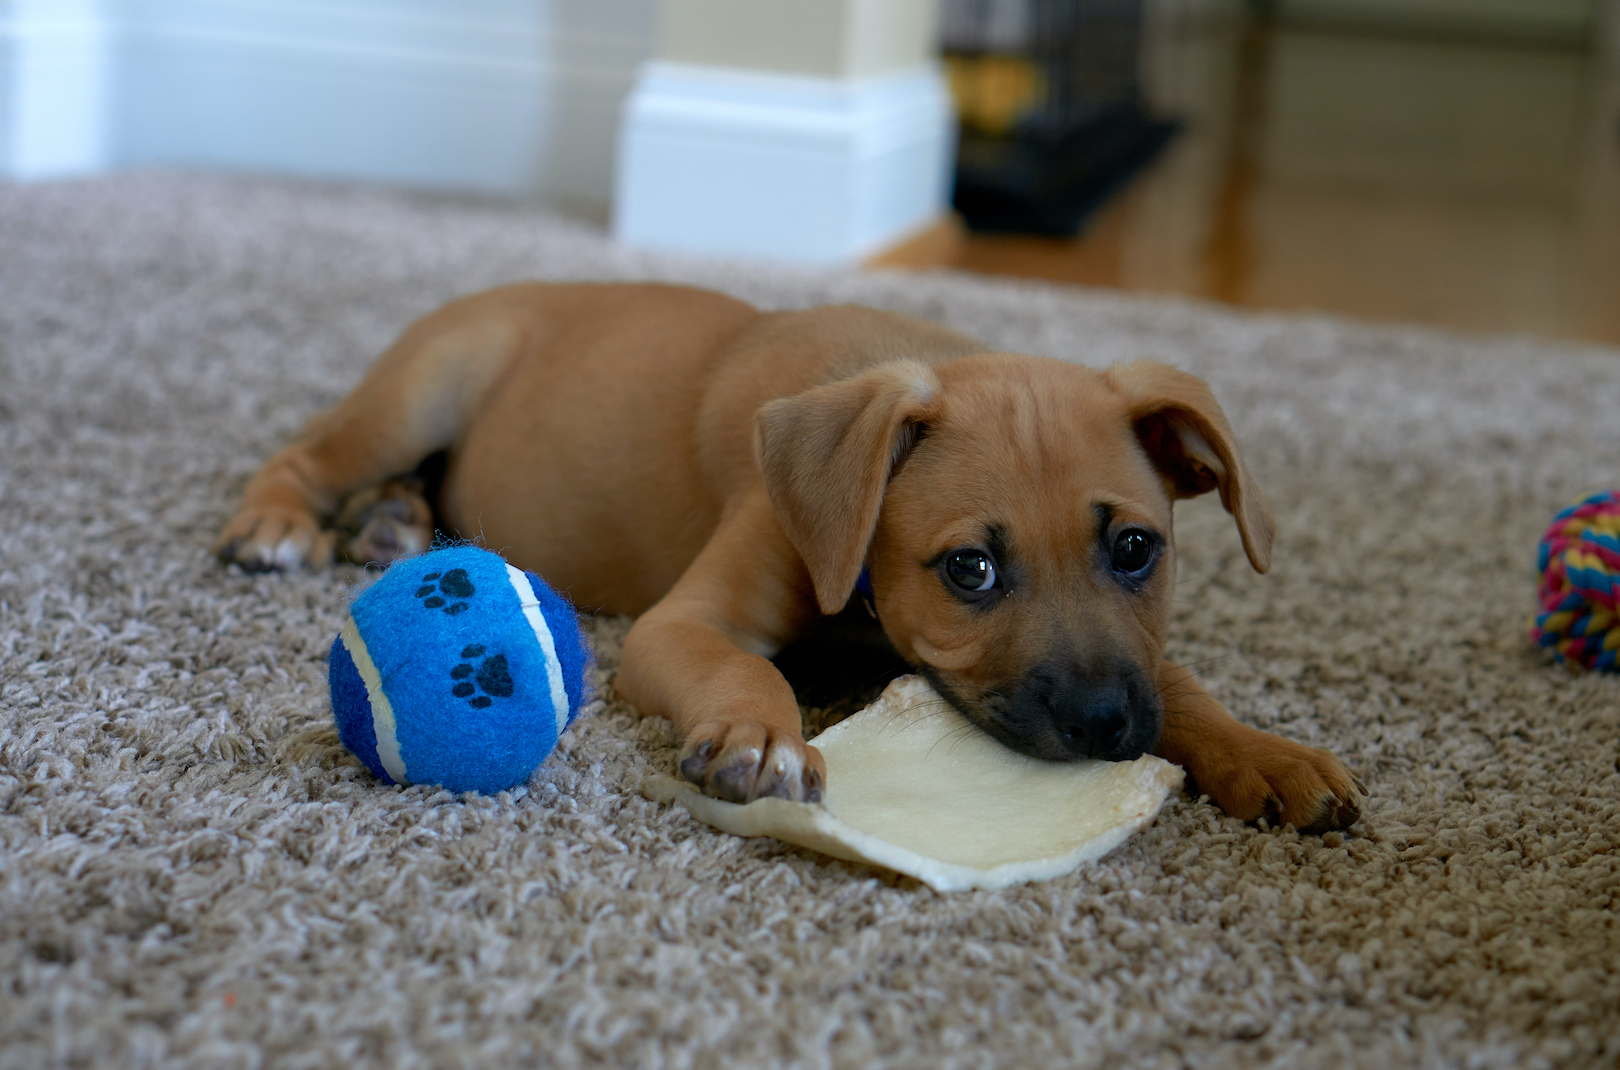 A puppy chewing on a bone next to a tennis ball toy